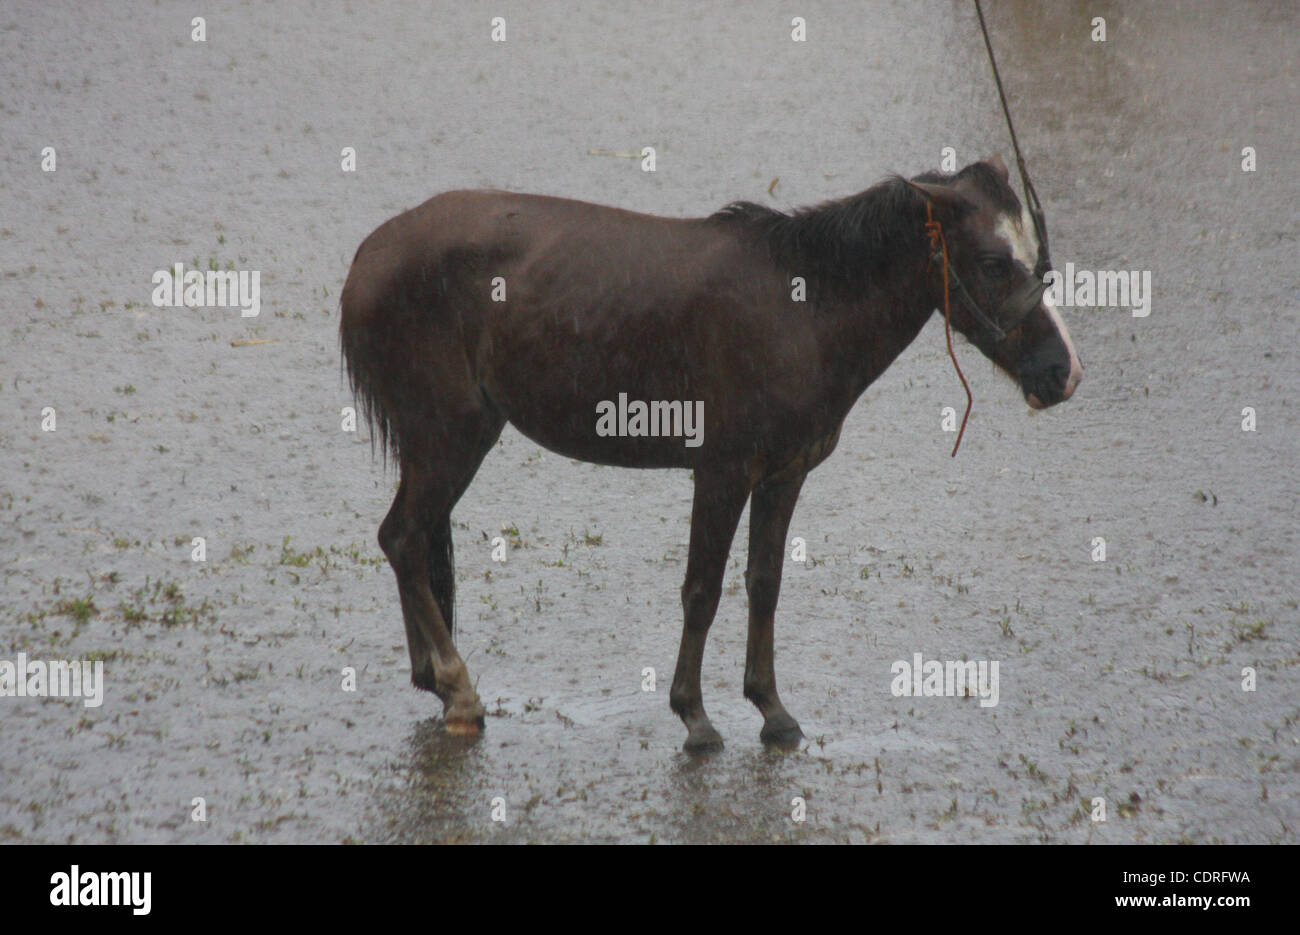 July 14, 2011 - Lake Sebu, Philippines - A female horse stands in pouring rain after horse fighting in Lake Sebu, a small town in the southern Philippines. The event was part of Tnalak Festival of South Cotabato province. Stallions were forced to fight to the death. The savagery was banned 13 years  Stock Photo